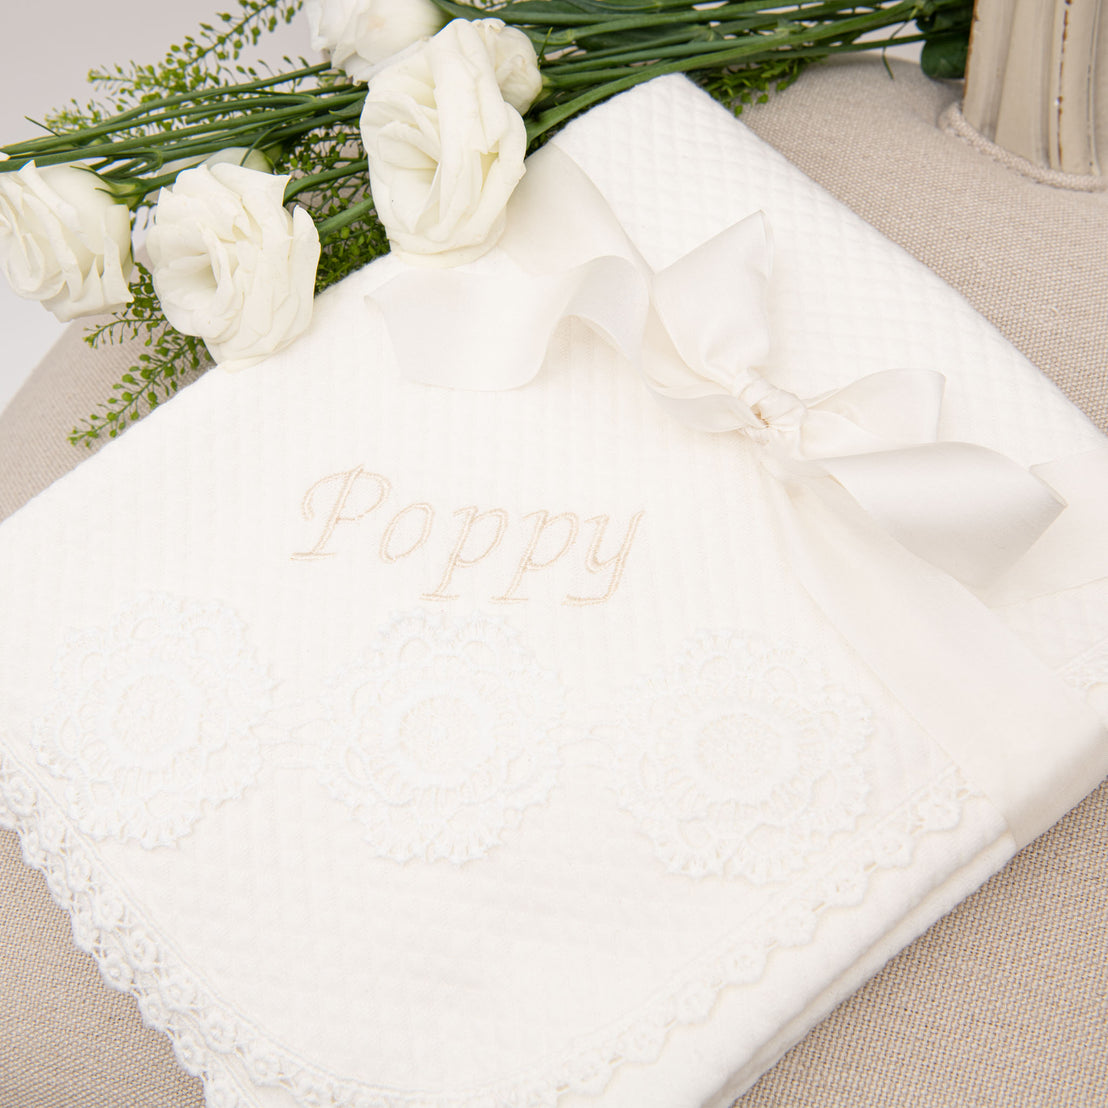  Poppy personalized blanket wrapped in a beautiful bow. 